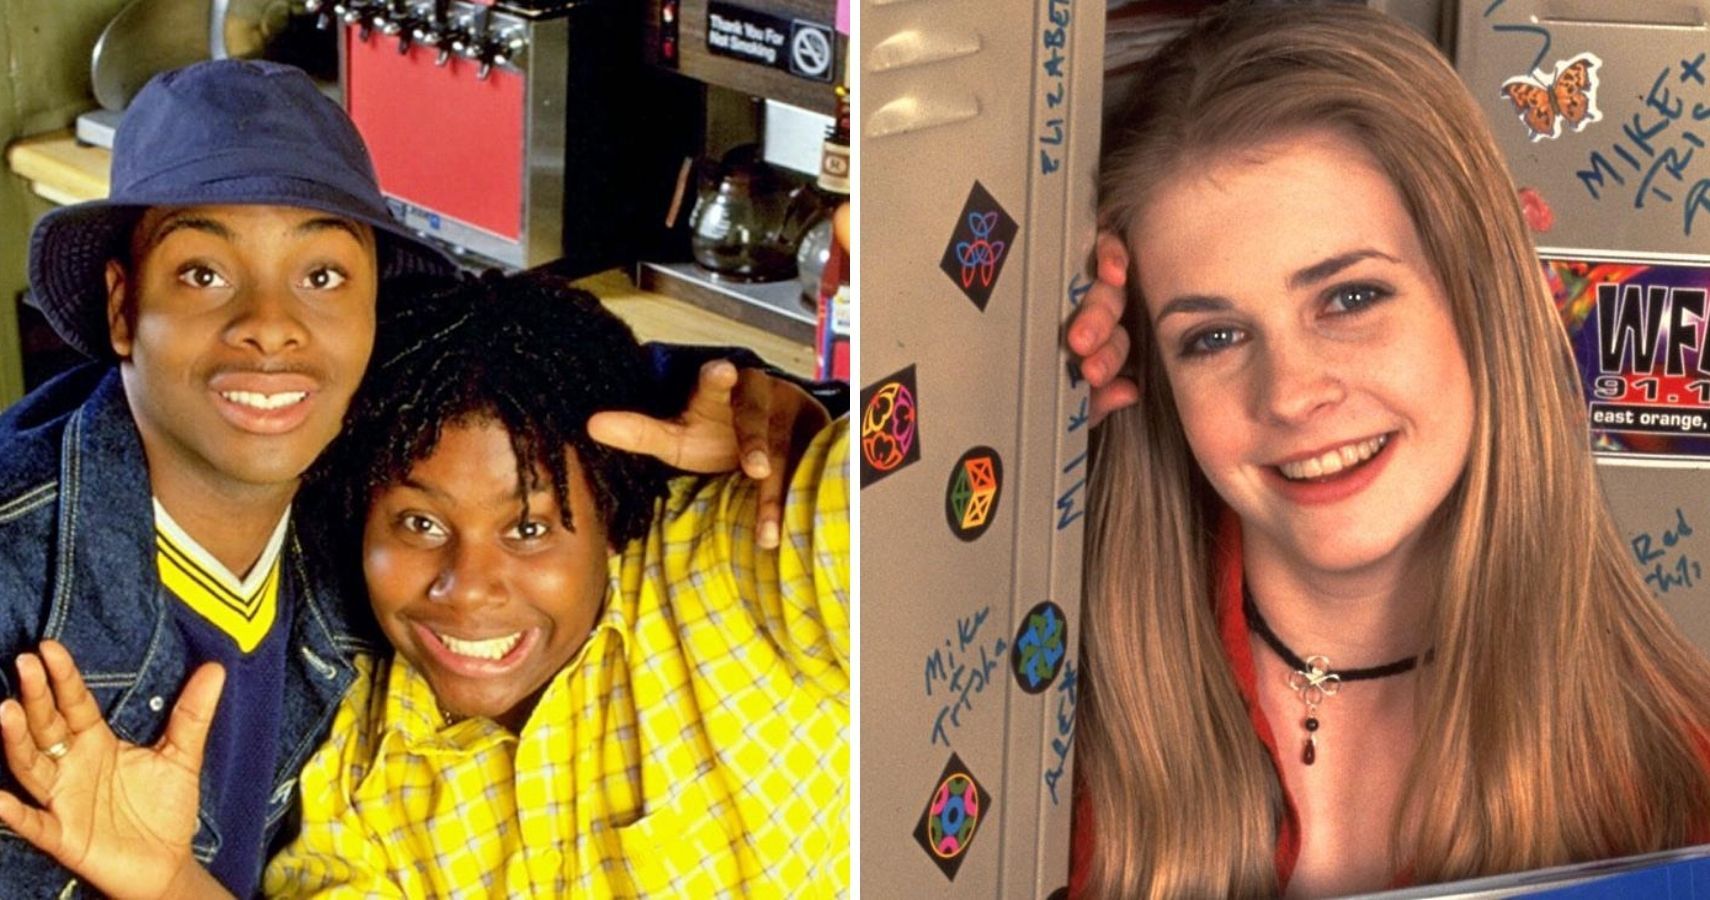 The 10 Best 90s Live Action Nickelodeon Shows Ranked According To IMDb 